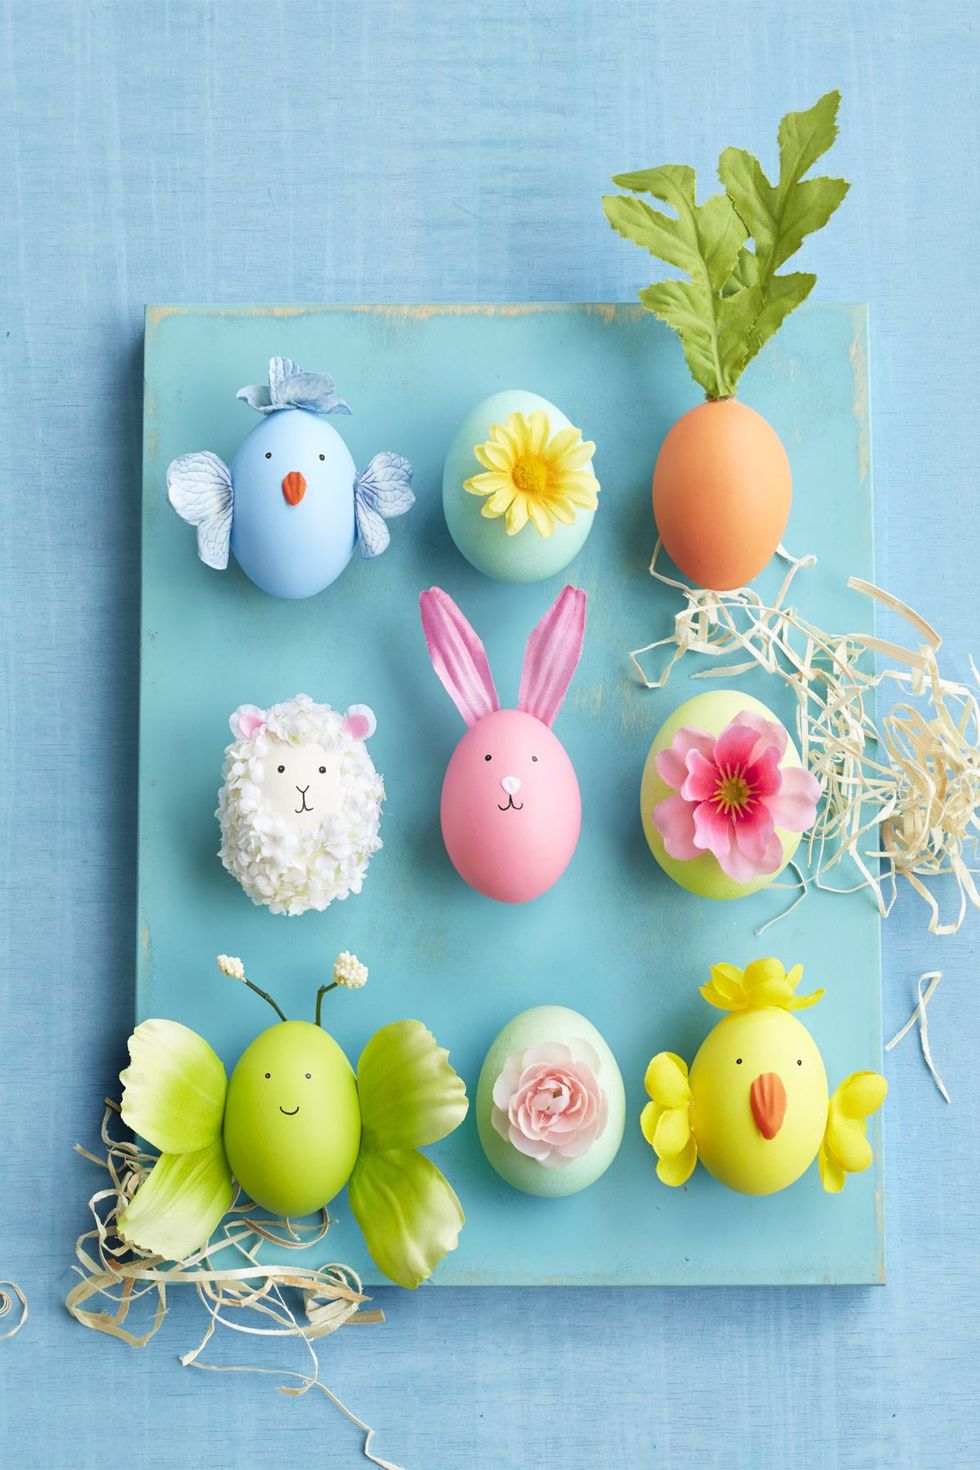 10+ Easter crafts ideas for kids & adults